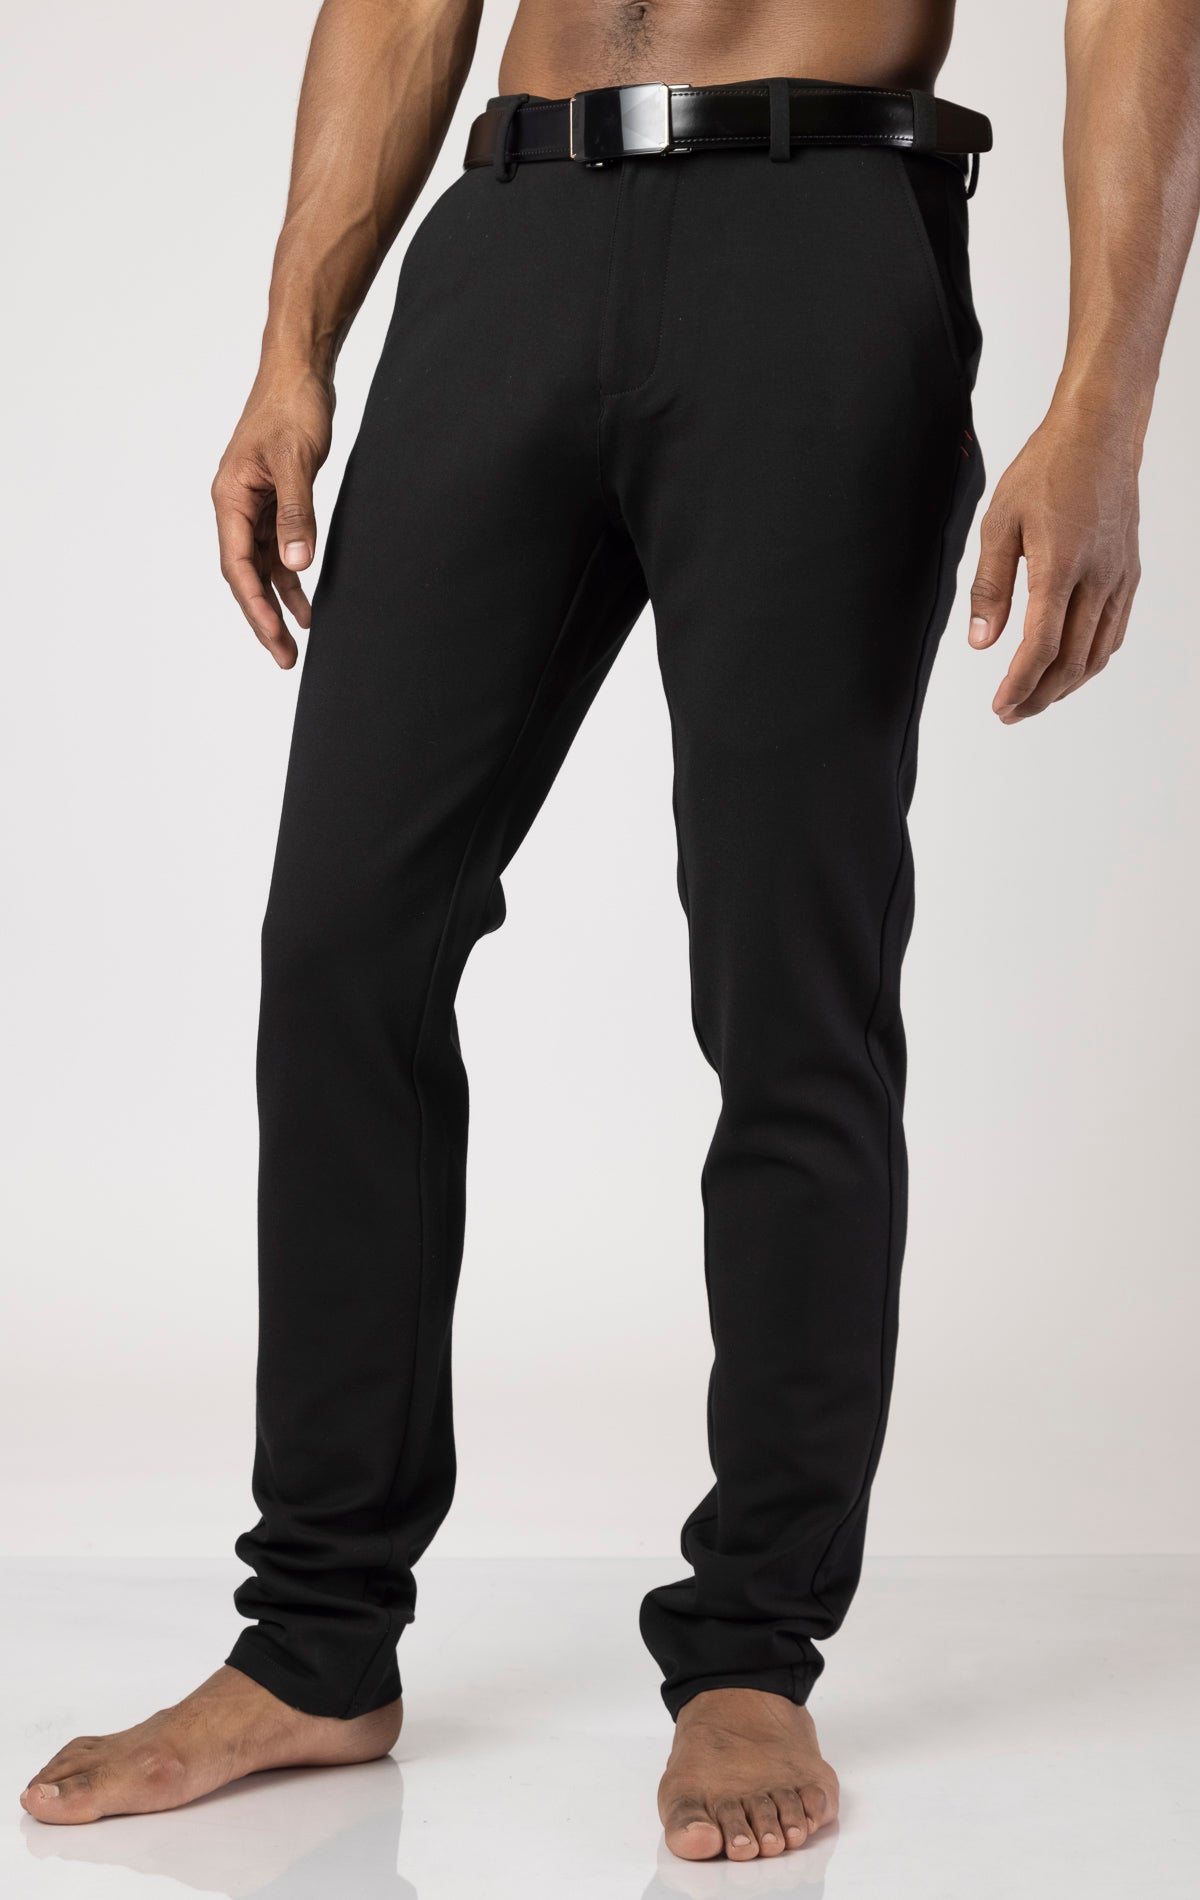 Beretta Pants, Men's slim fit pants with slanted pockets, made from high-quality cotton fabric for comfort and freedom of movement. 'ON THE MOVE' pants, 34-inch length